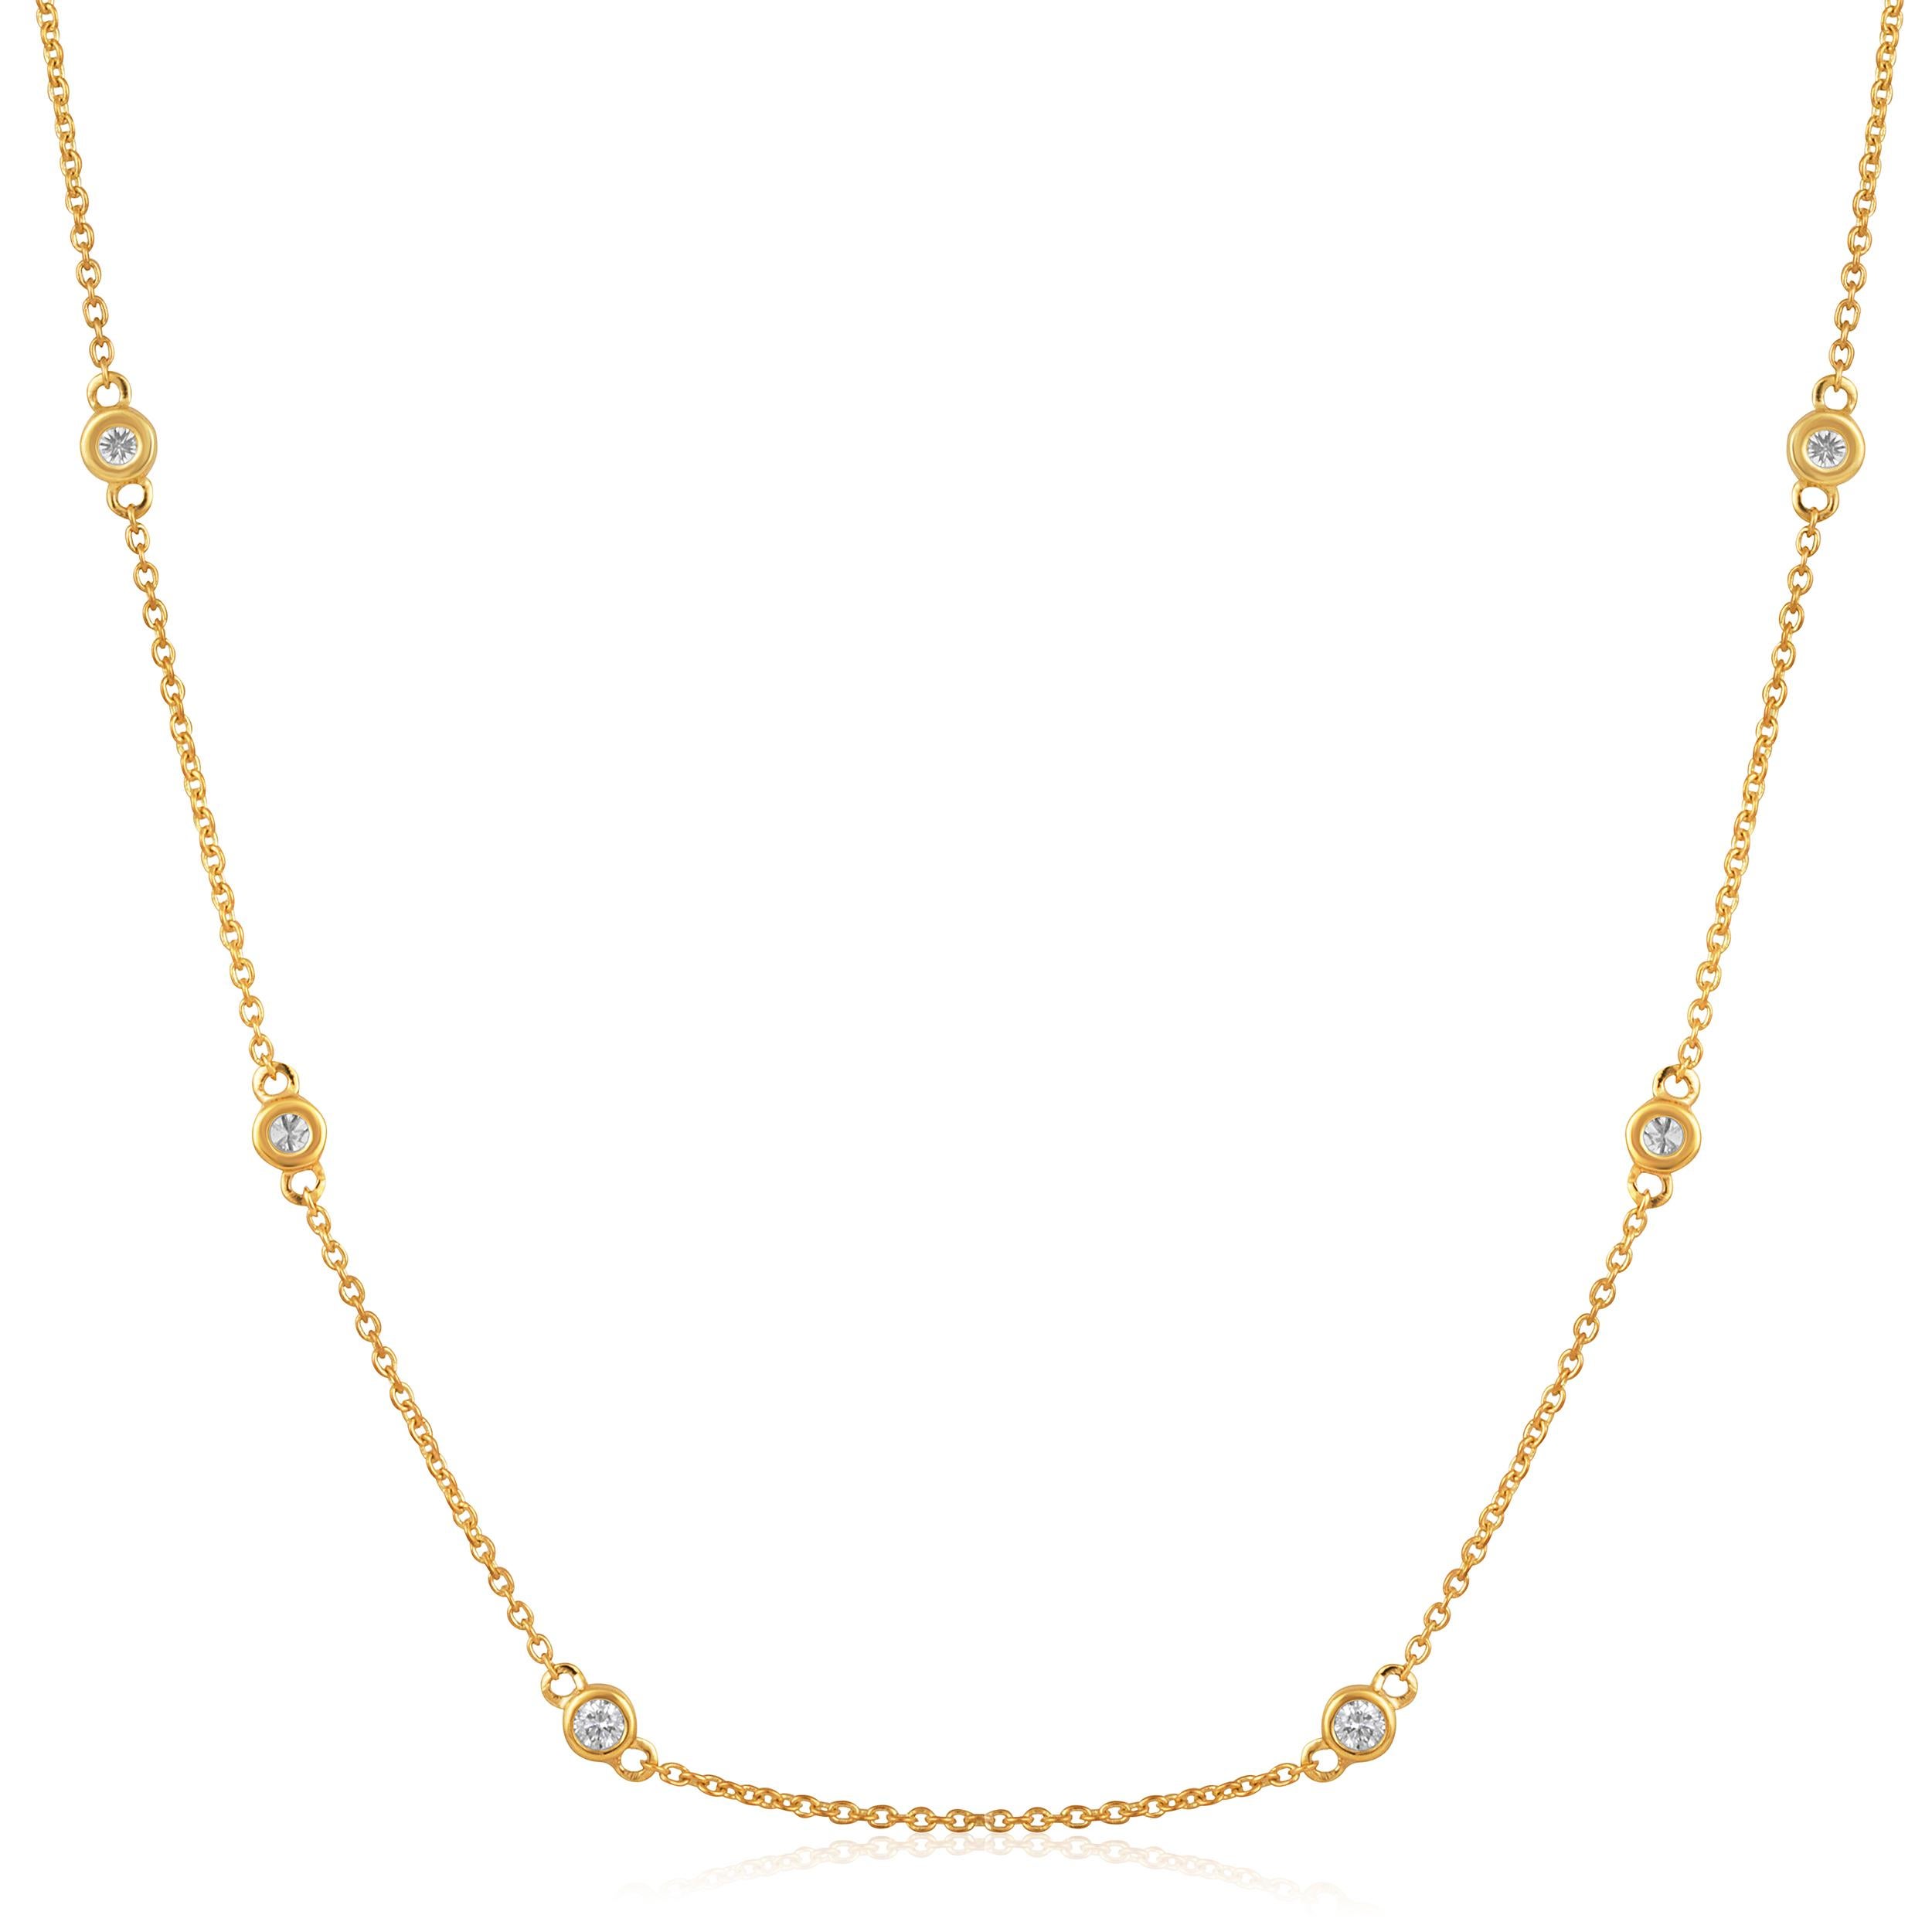 Crafted in 2.67 grams of 14K Yellow Gold, the necklace contains 14 stones of Round Natural Diamonds with a total of 0.79 carat in F-G color and SI clarity. The necklace length is 18 inches.

CONTEMPORARY AND TIMELESS ESSENCE: Crafted in